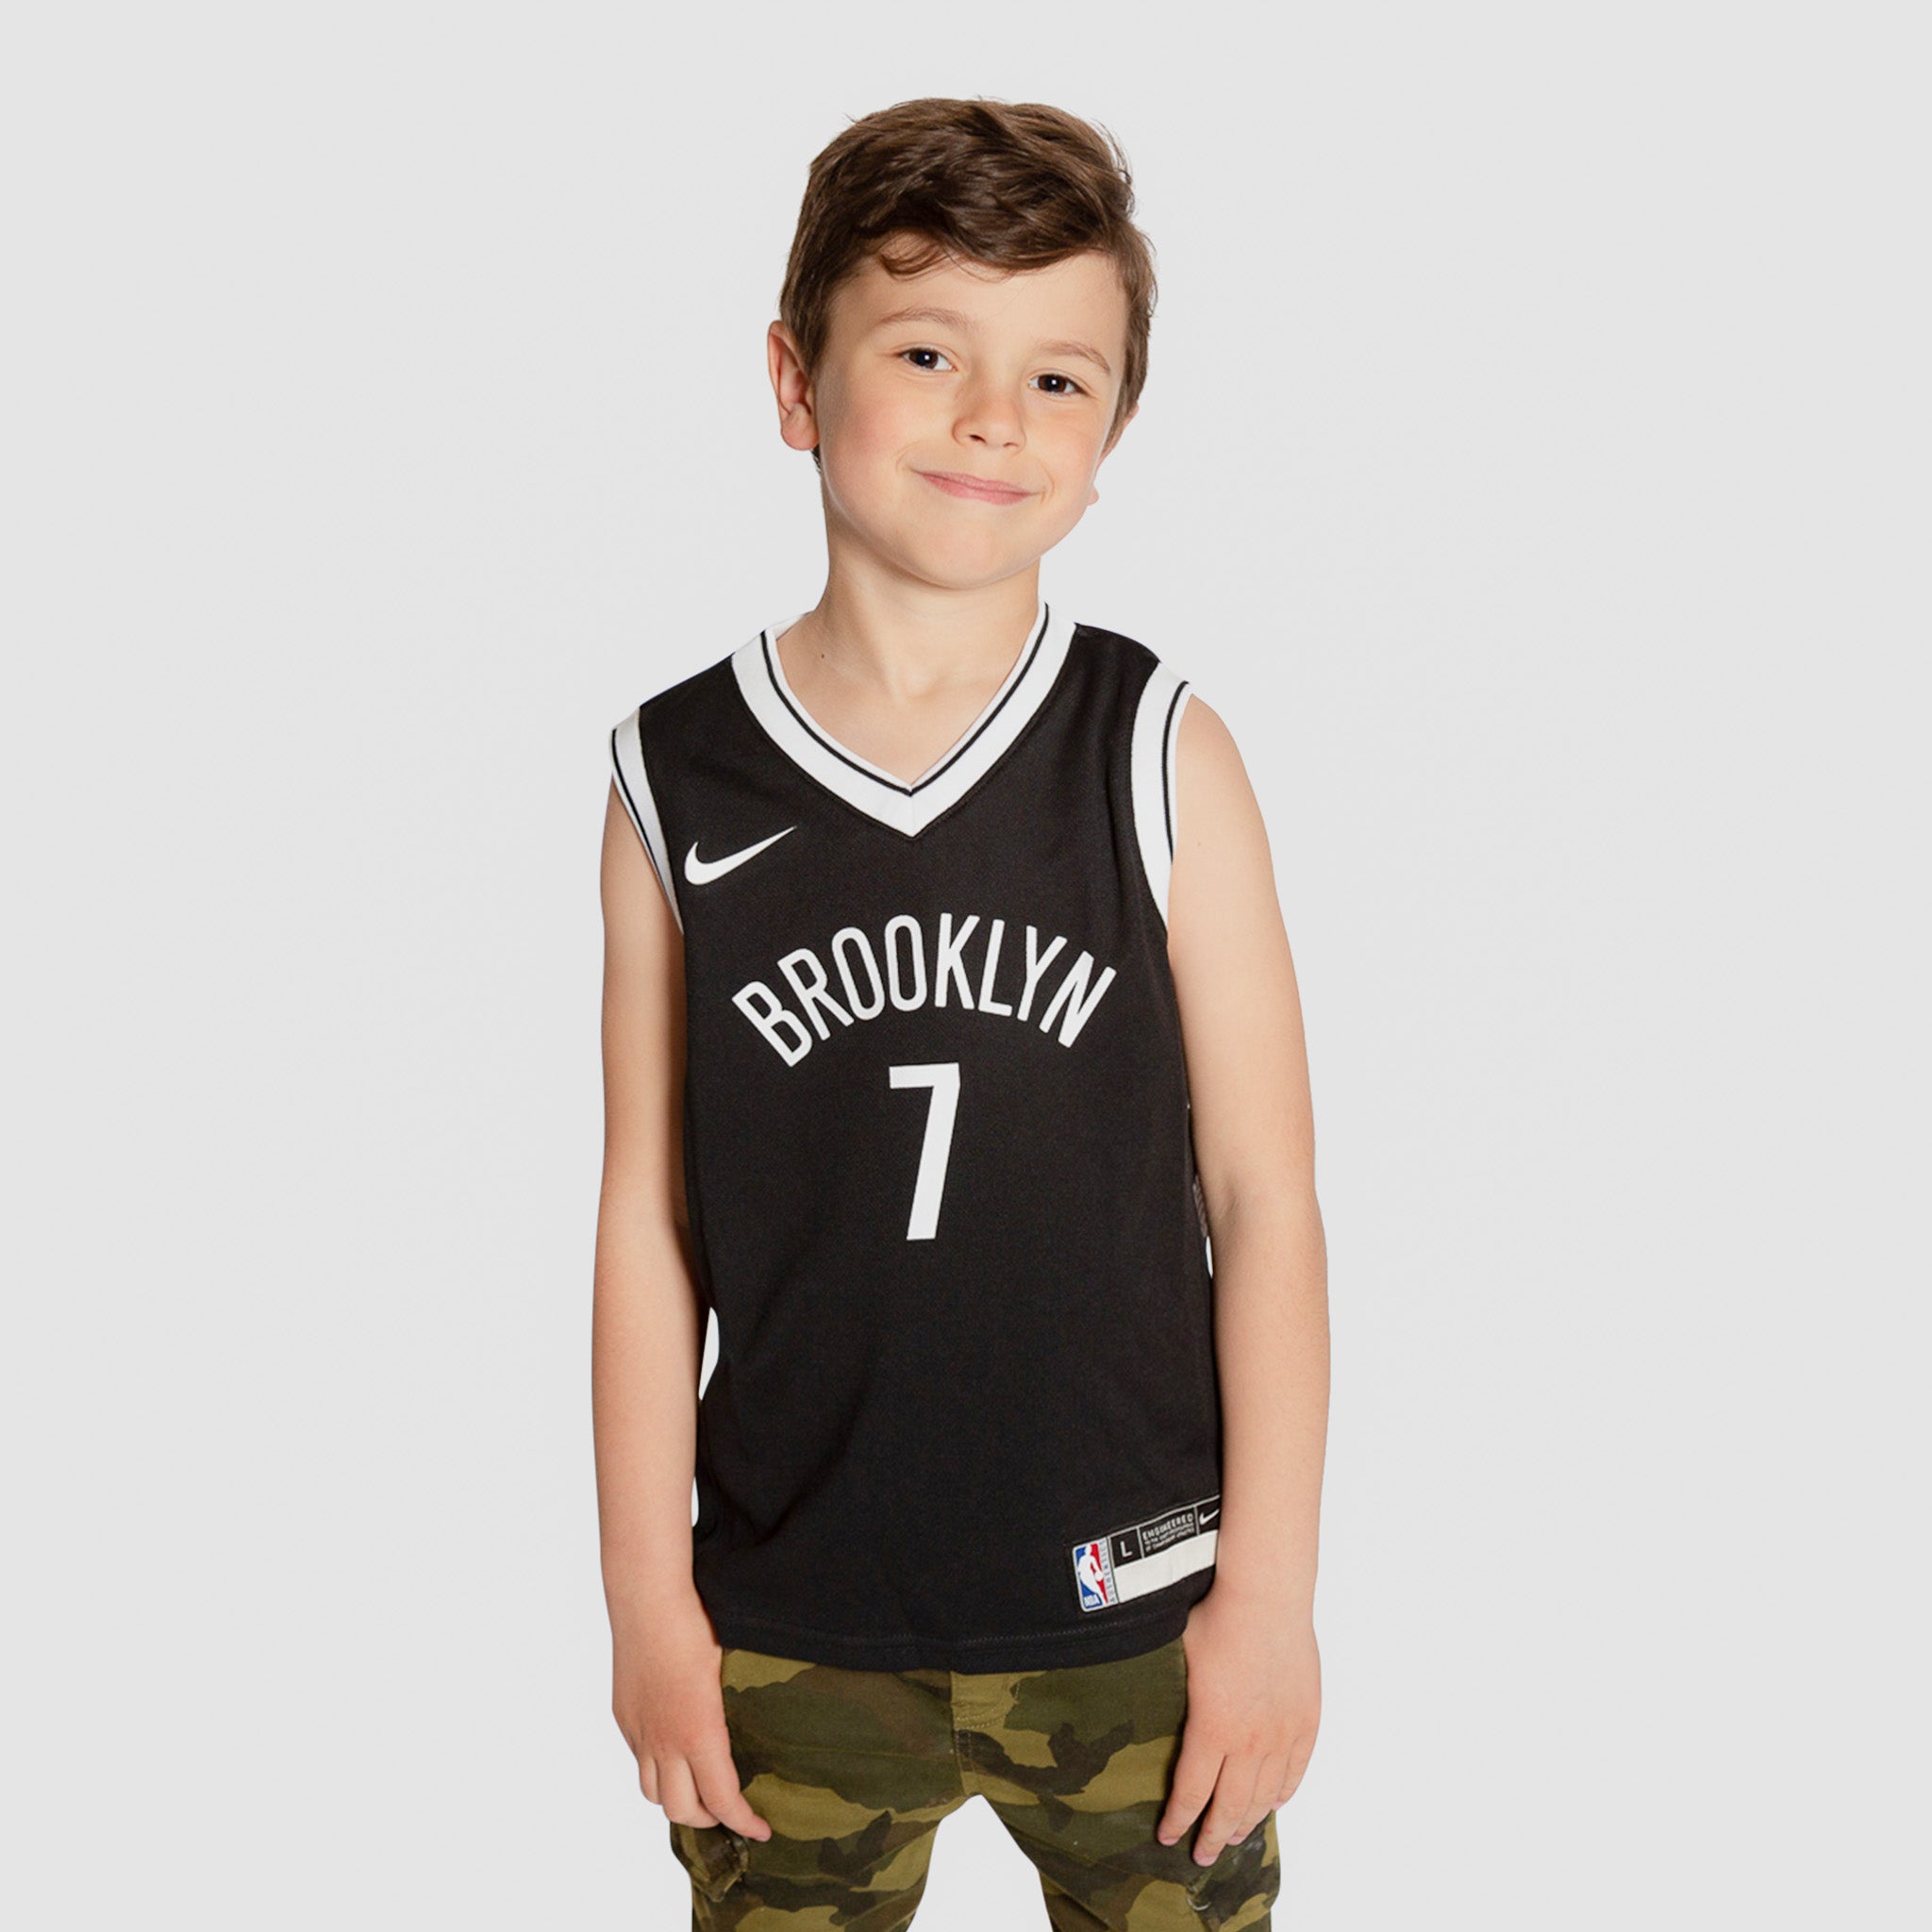 NBA Brooklyn Nets Icon Edition 2022/23 Jersey - Kevin Durant